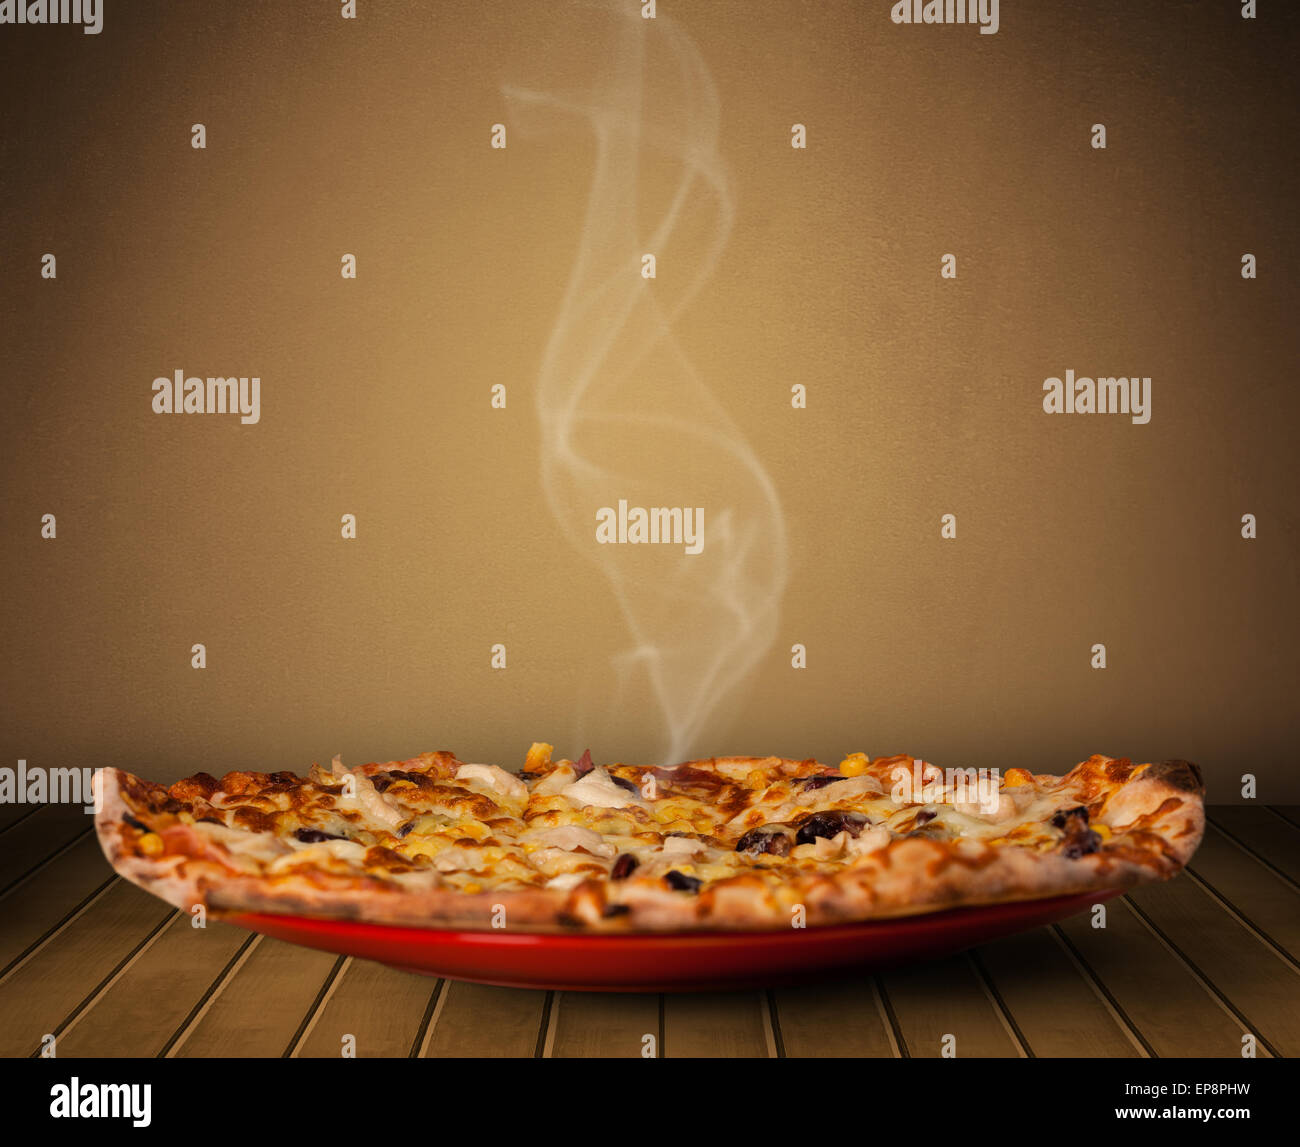 Delicious hot and fresh pizza with steam and smoke Stock Photo - Alamy